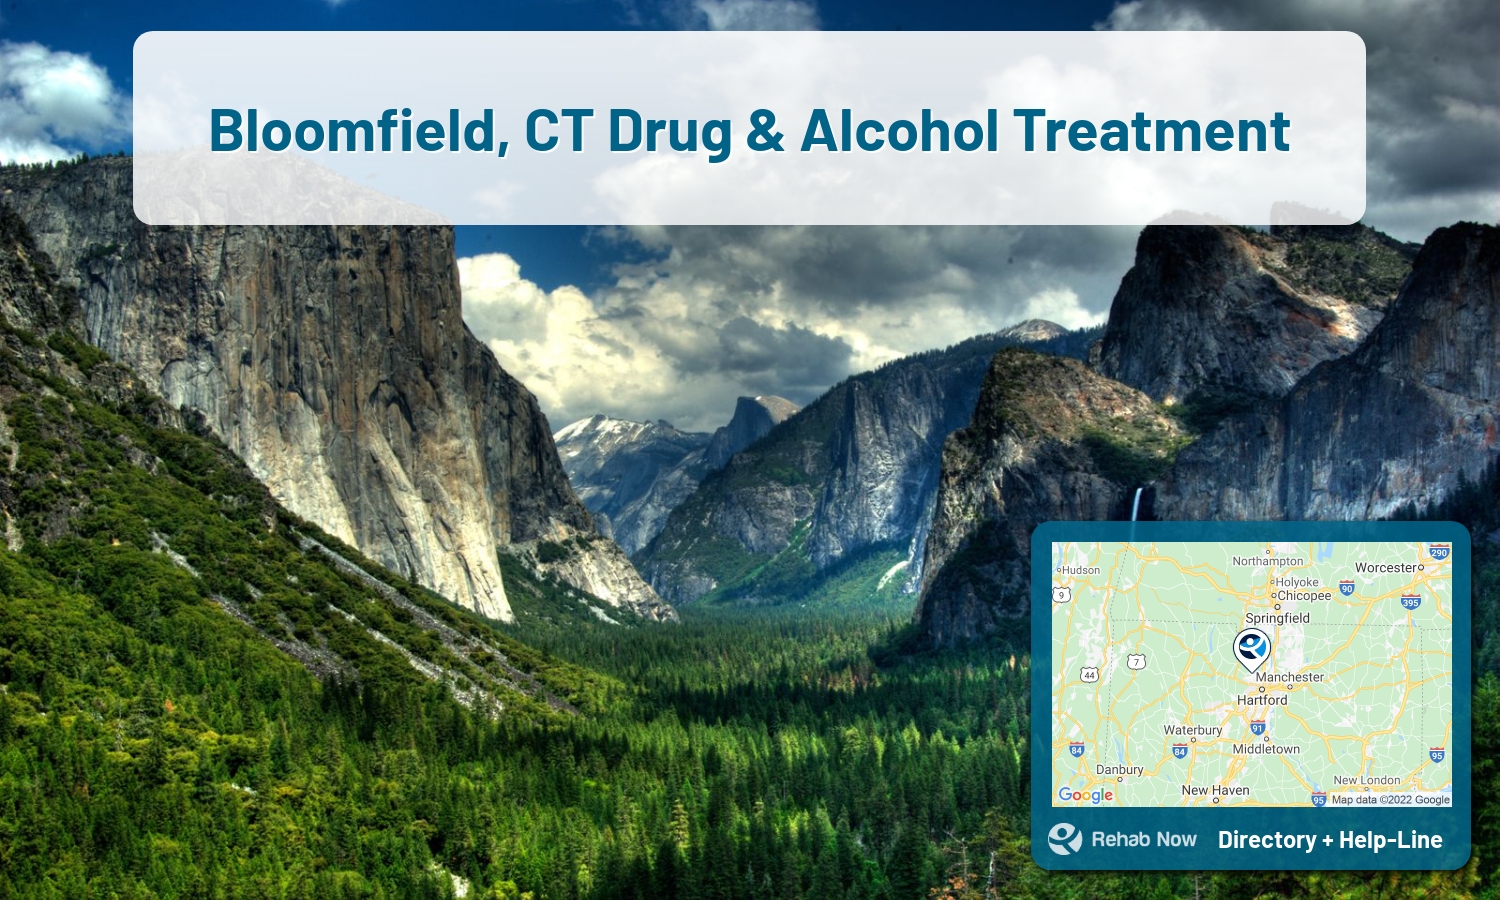 View options, availability, treatment methods, and more, for drug rehab and alcohol treatment in Bloomfield, Connecticut